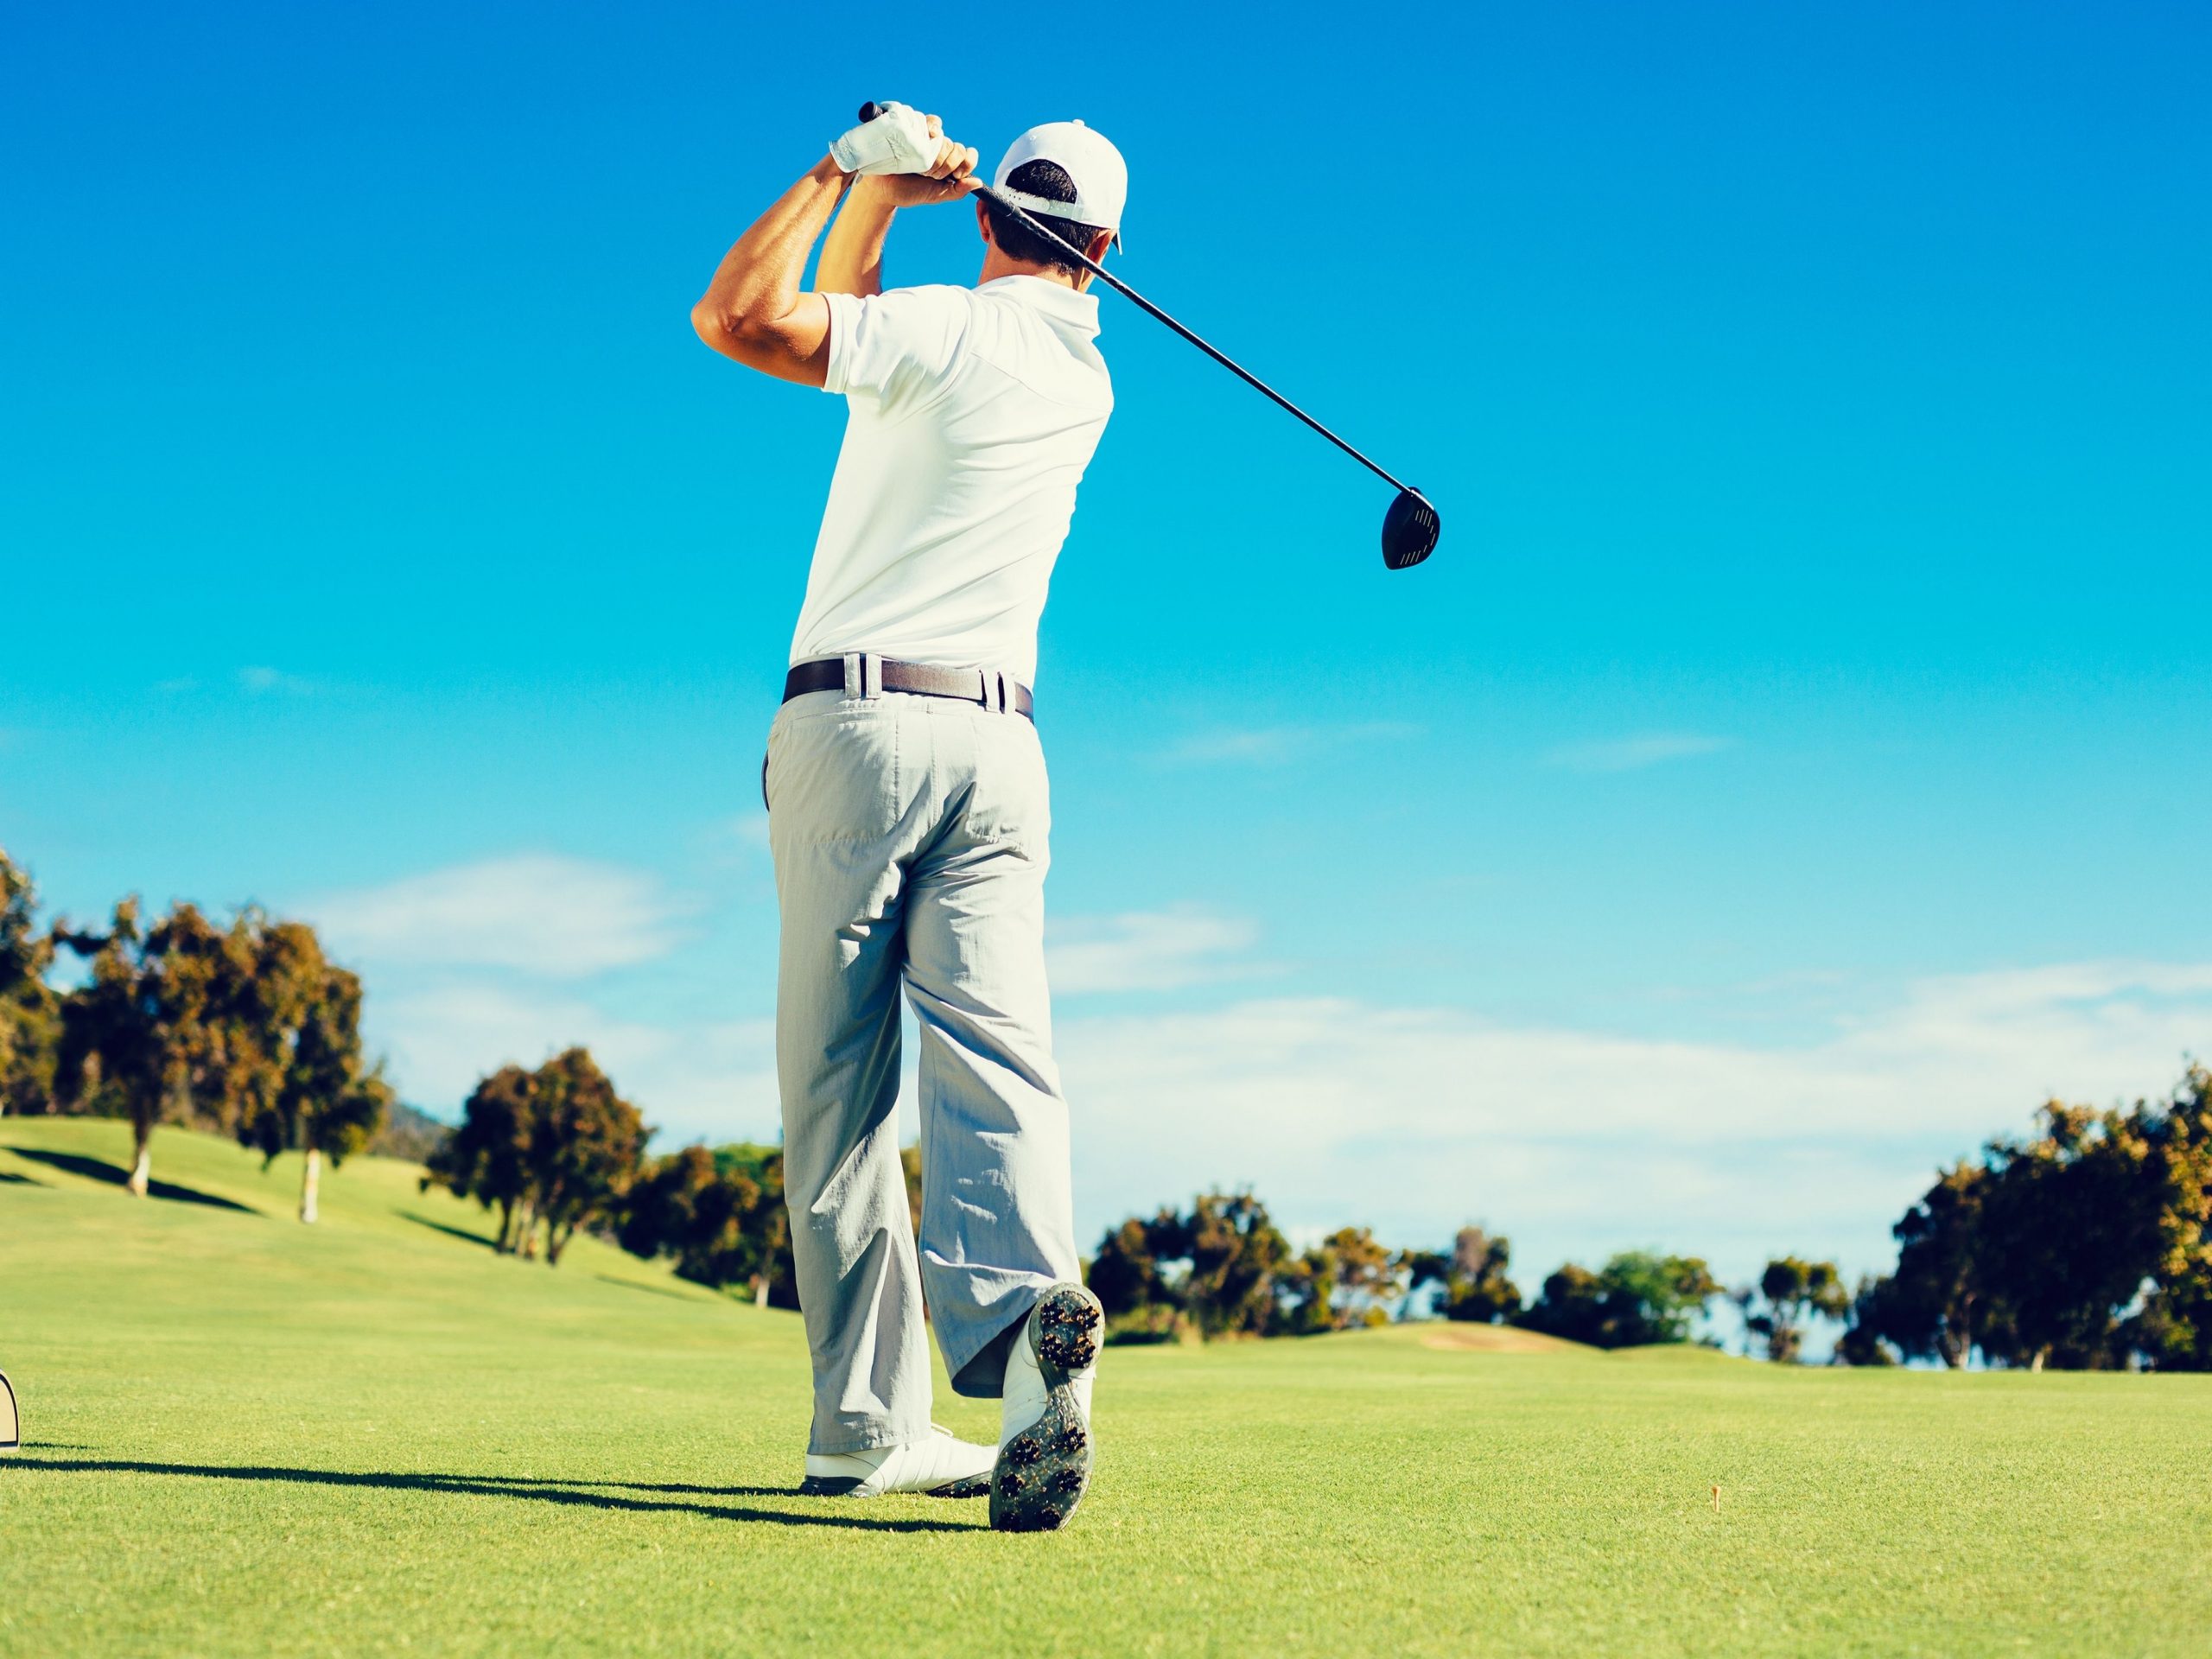 Typical Golf Injury - How to manage lower back pain